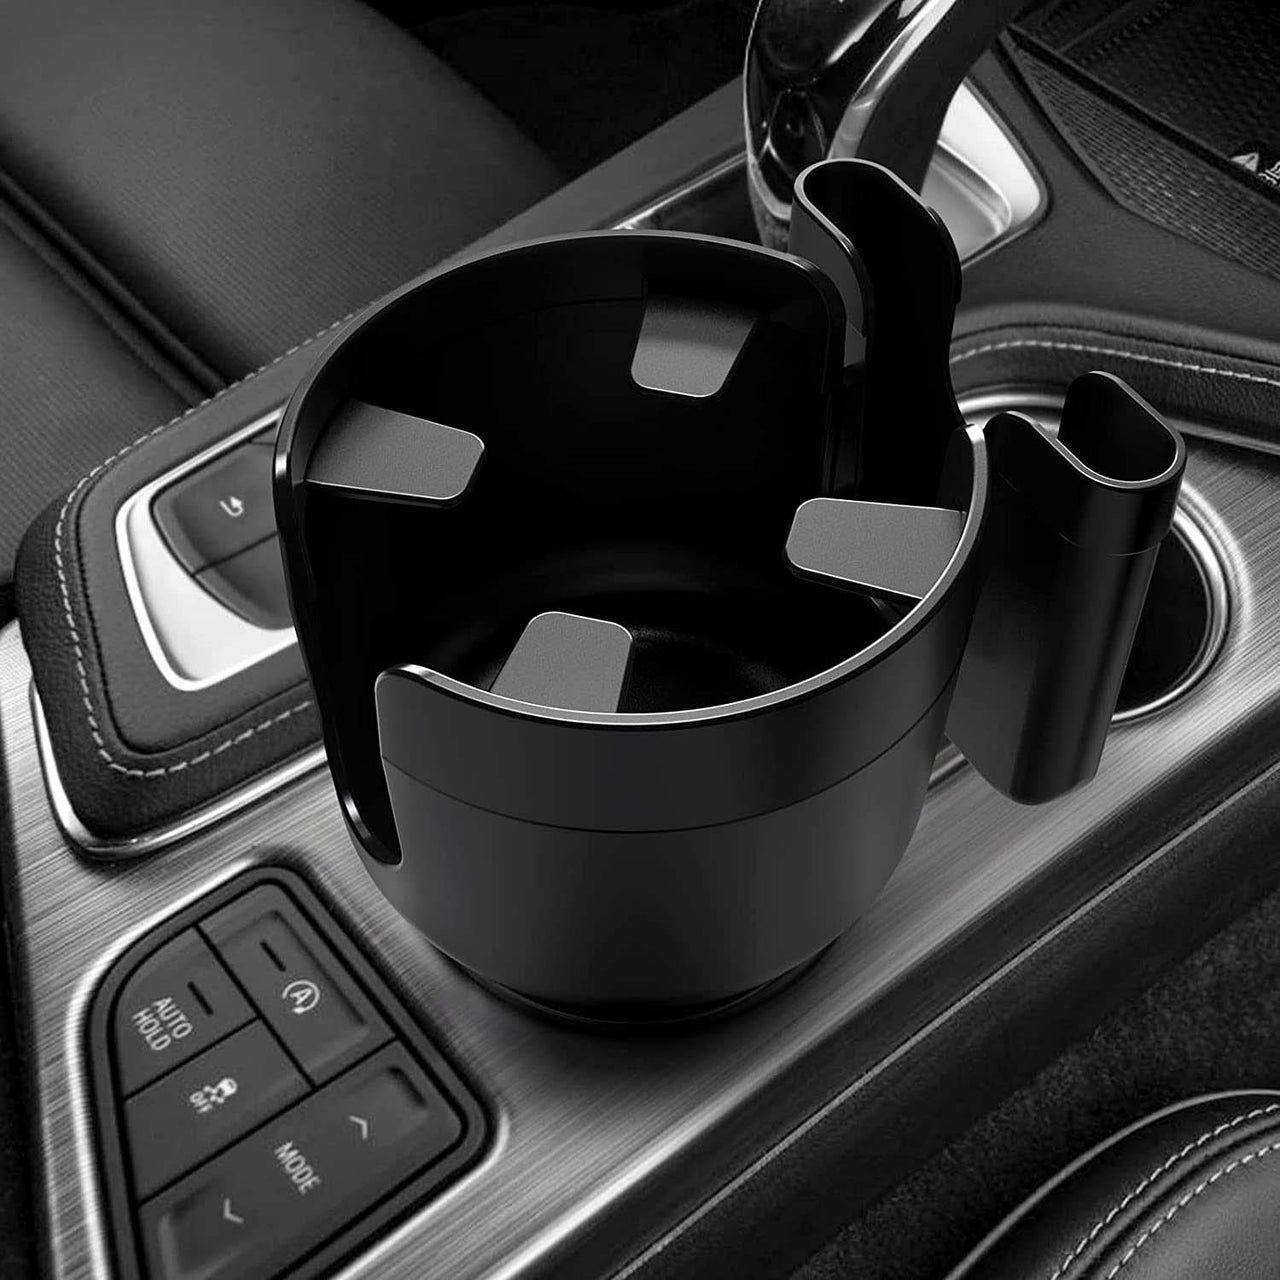 2-in-1 Car Cup Holder Expander Adapter with Adjustable Base, Custom Fit For Your Cars, Car Cup Holder Expander Organizer with Phone Holder, Fits 32/40 oz Drinks Bottles, Car Accessories TS15988